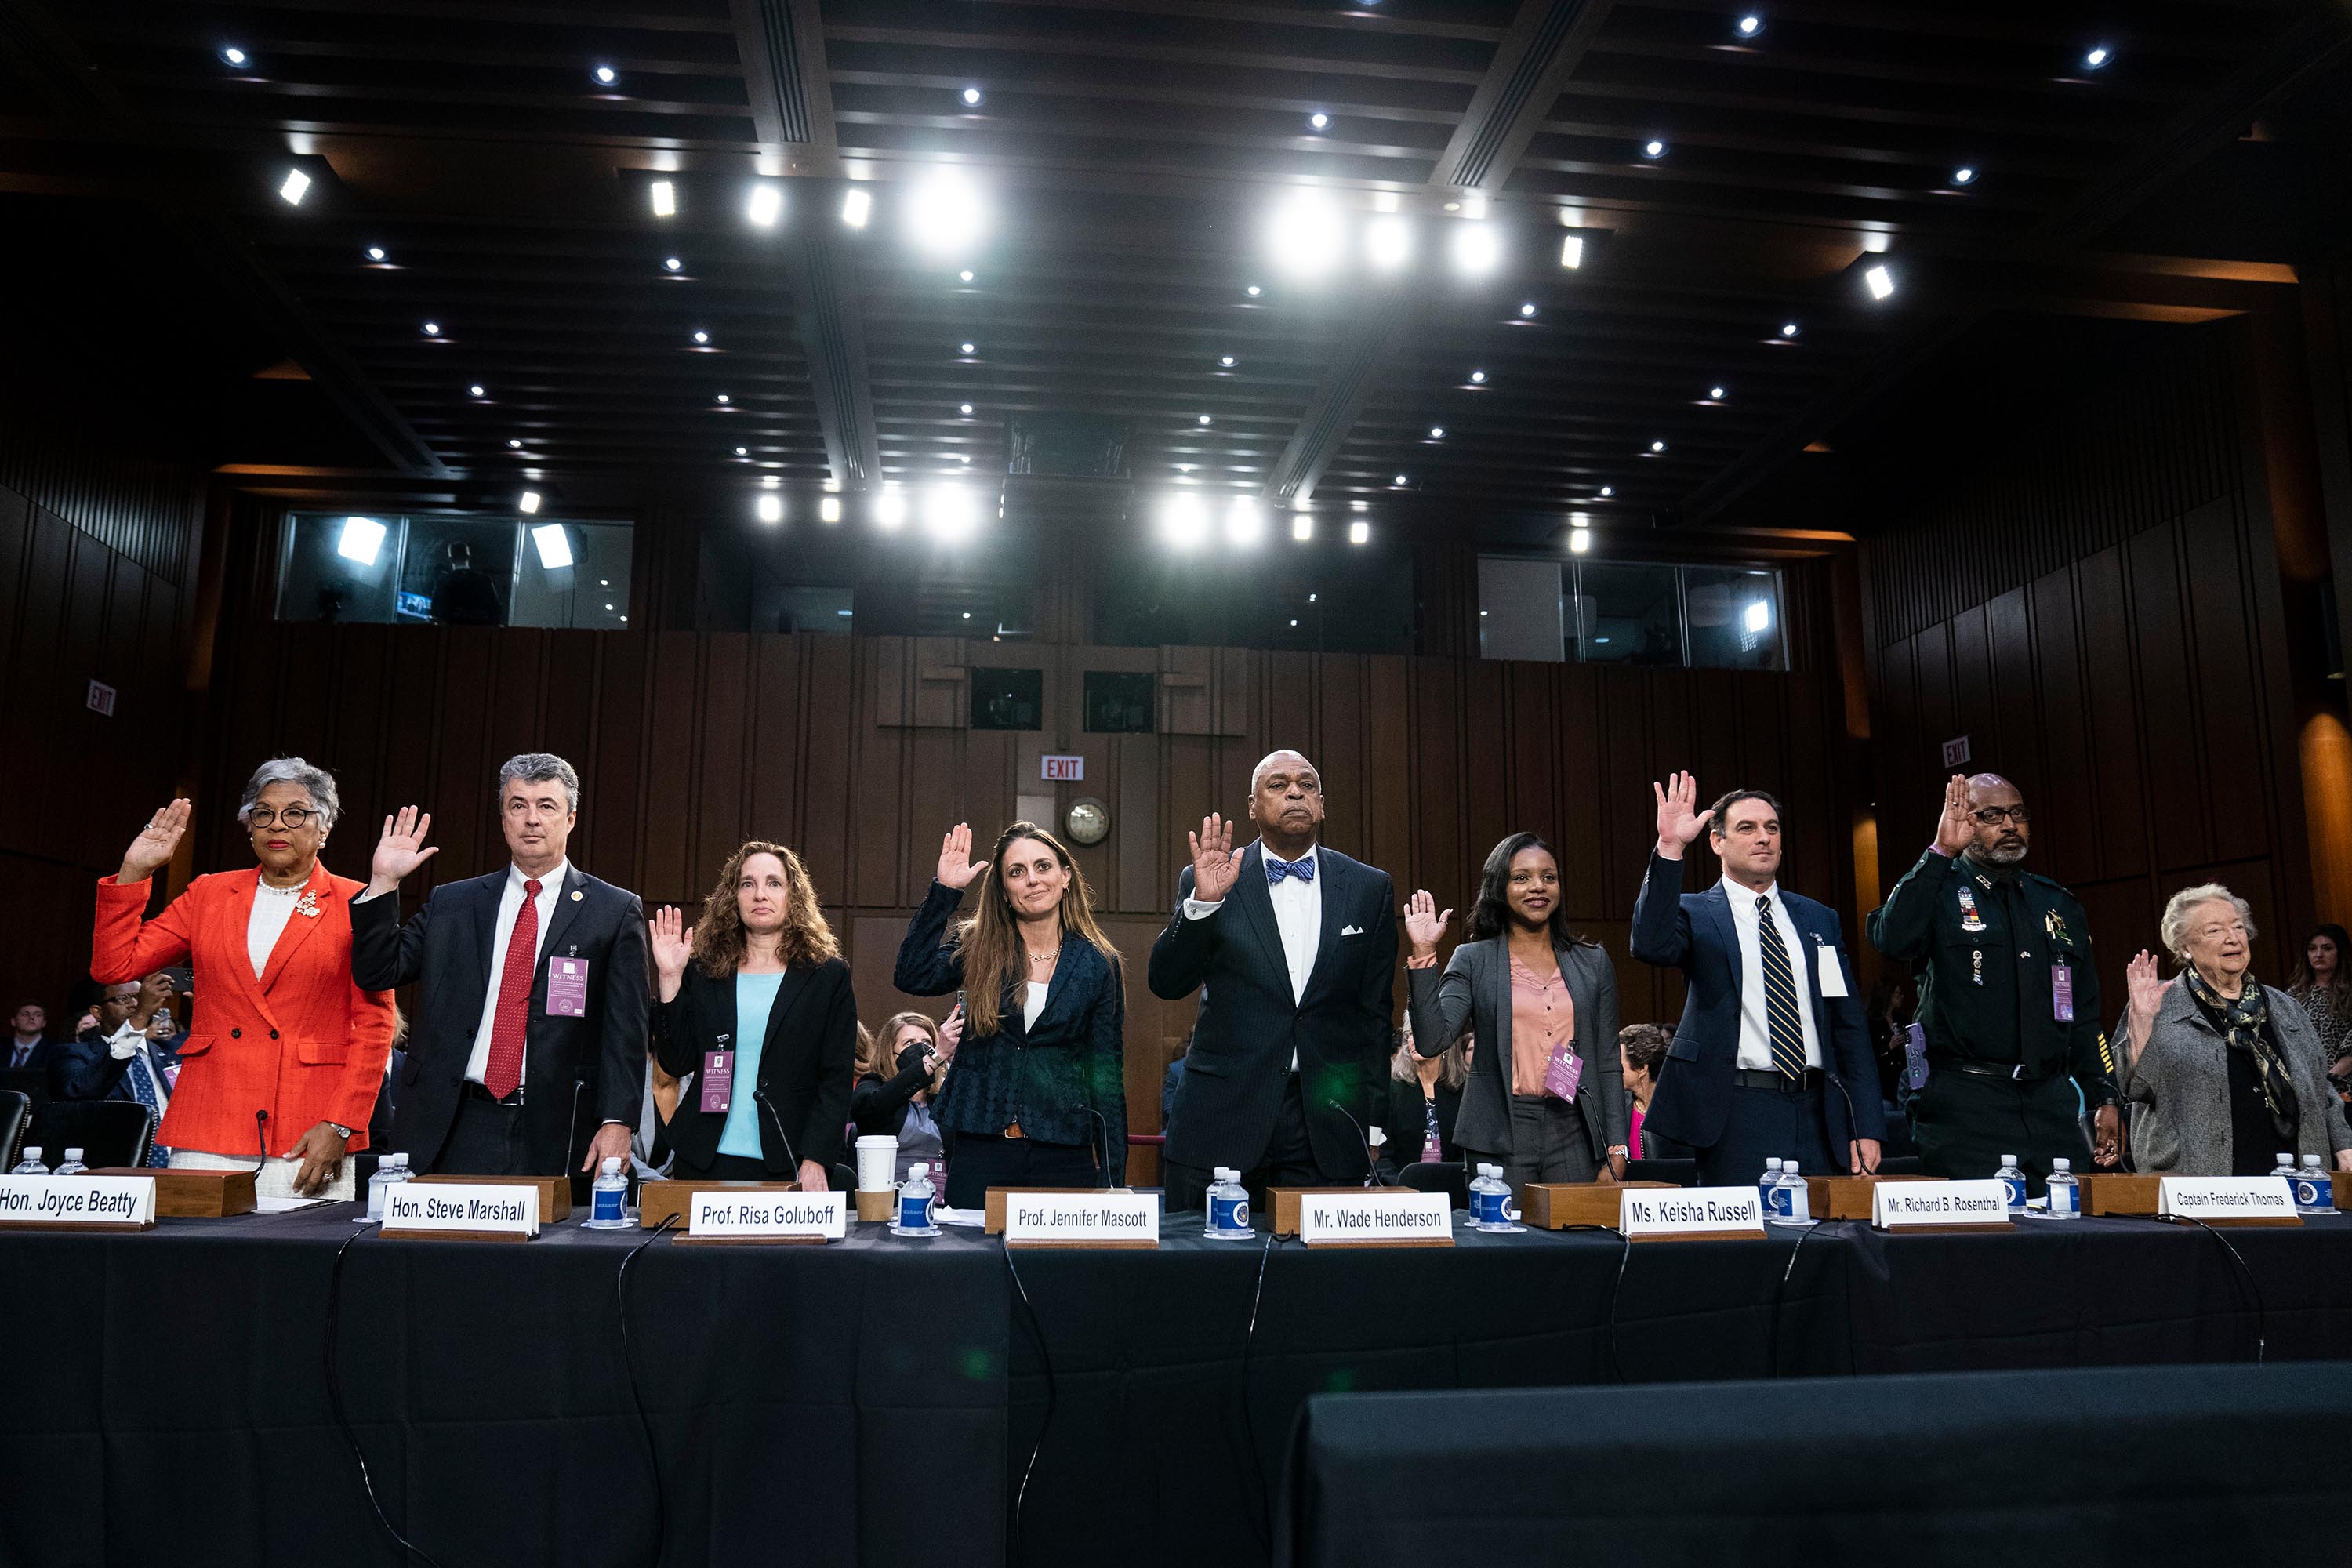 Character witnesses for Judge Ketanji Brown Jackson are sworn in to testify before the Senate Judiciary Committee on the fourth day of Judge Jackson’s confirmation hearing on Capitol Hill on Thursday, March 24.